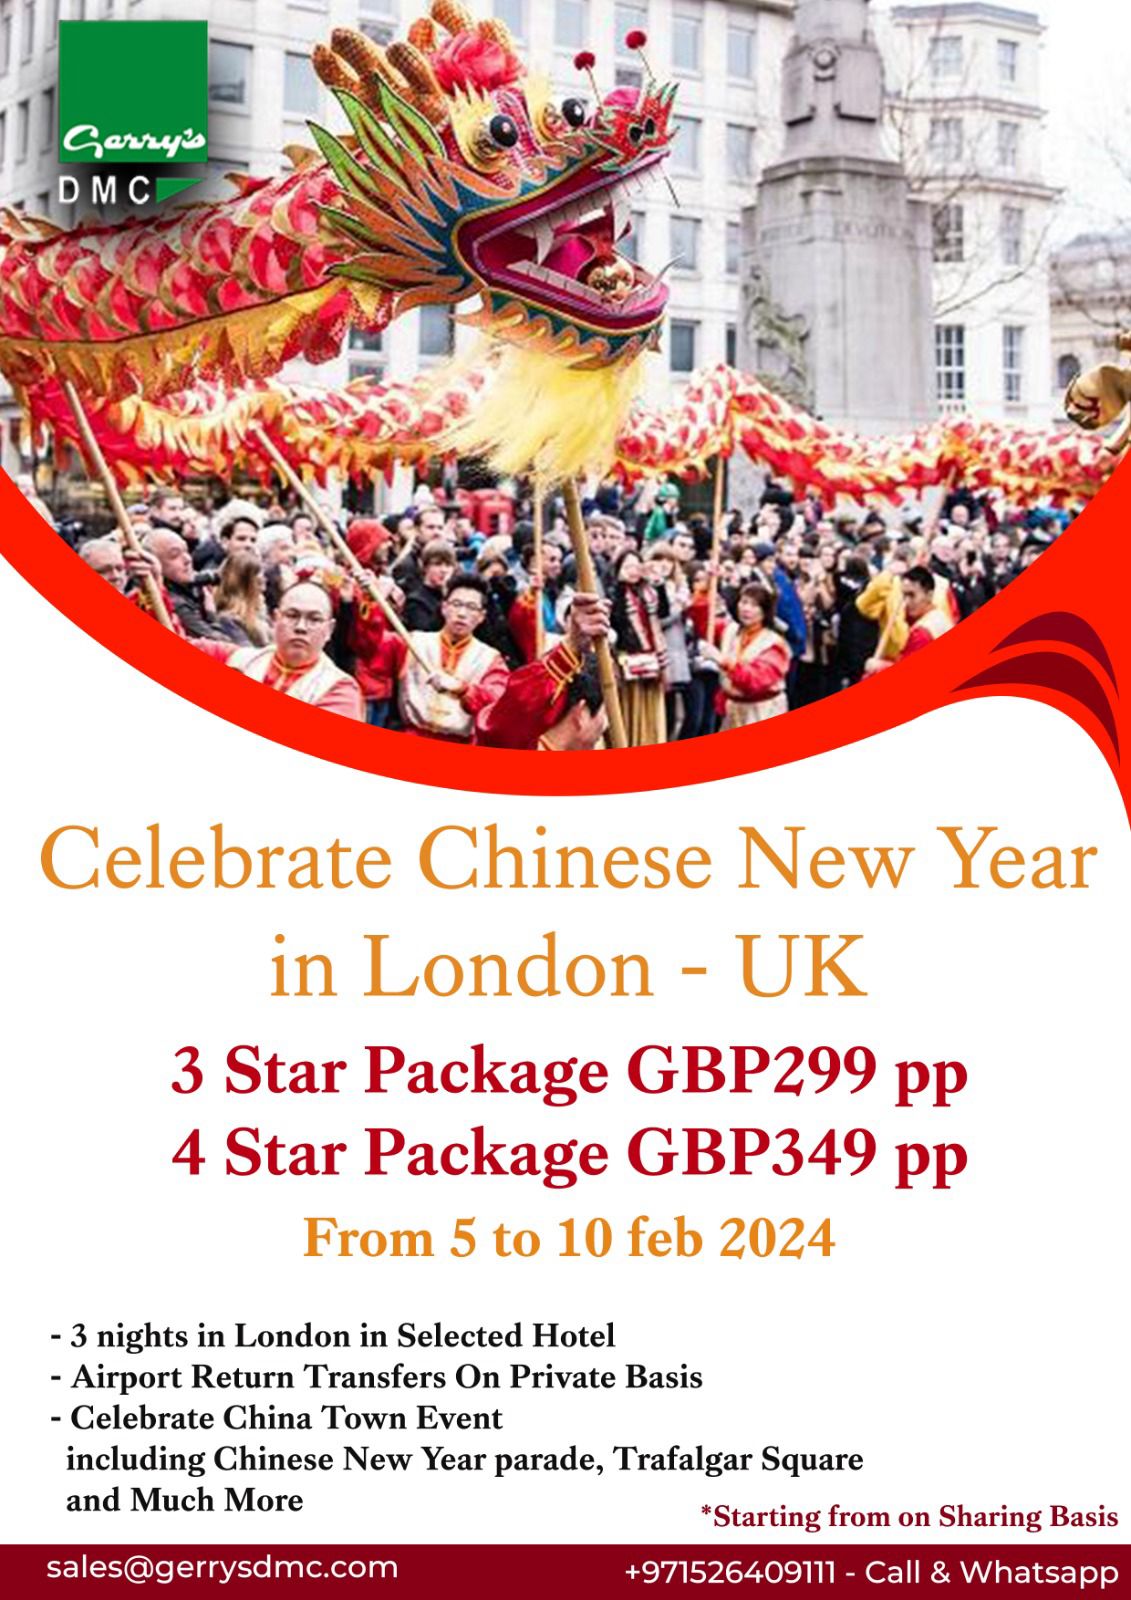 Chinease New Year In London - UK